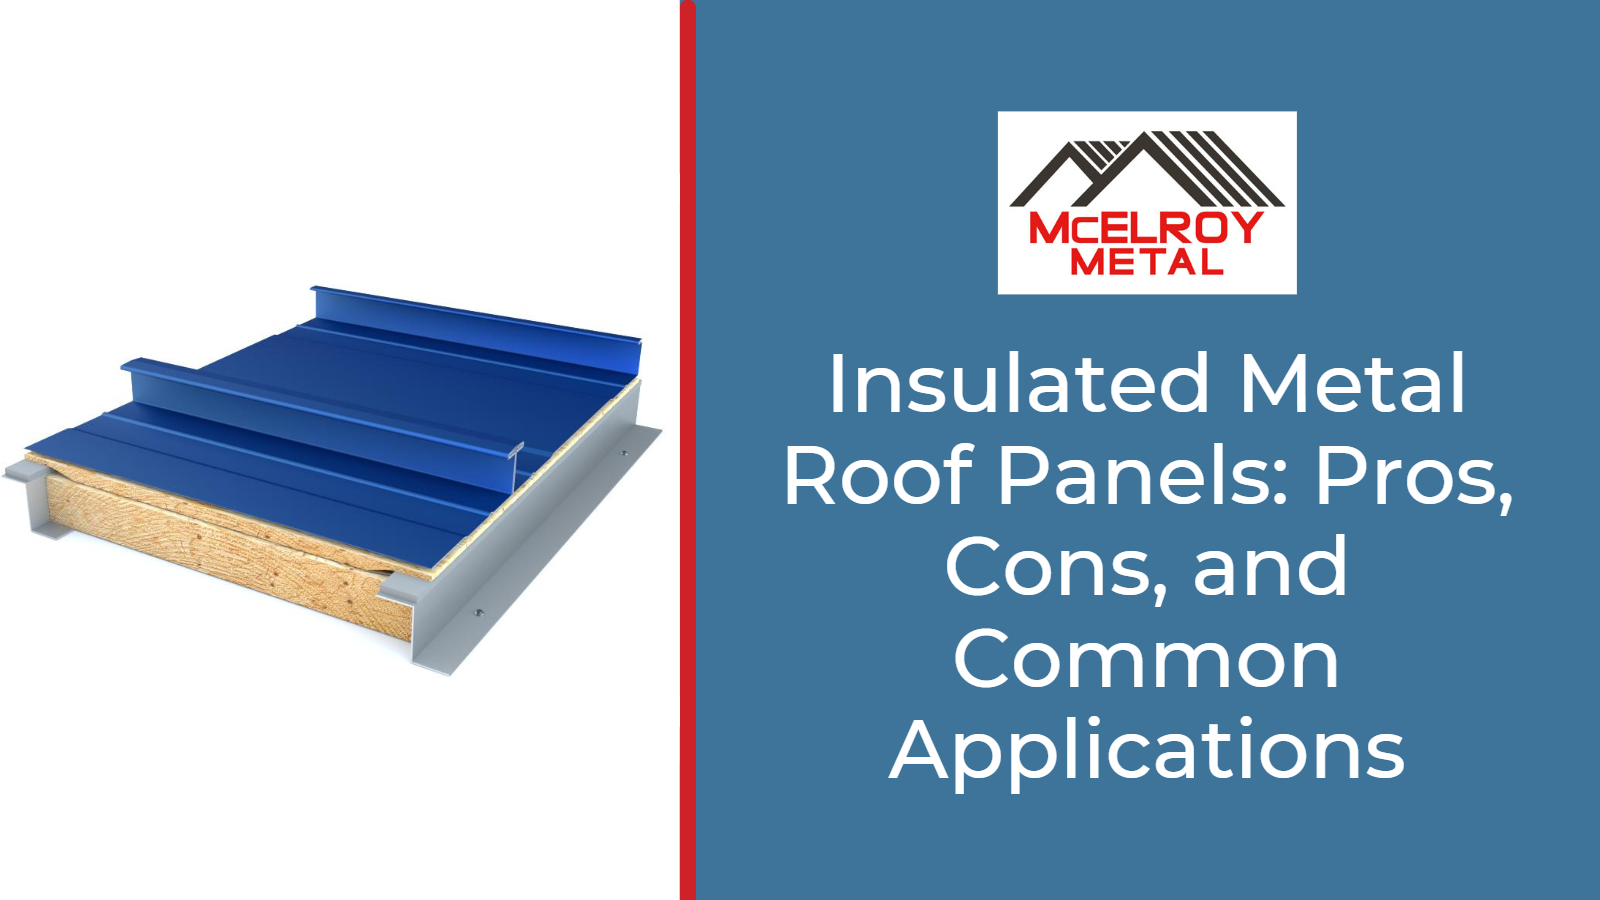 Insulated Metal Roof Panels: Pros, Cons, and Common Applications